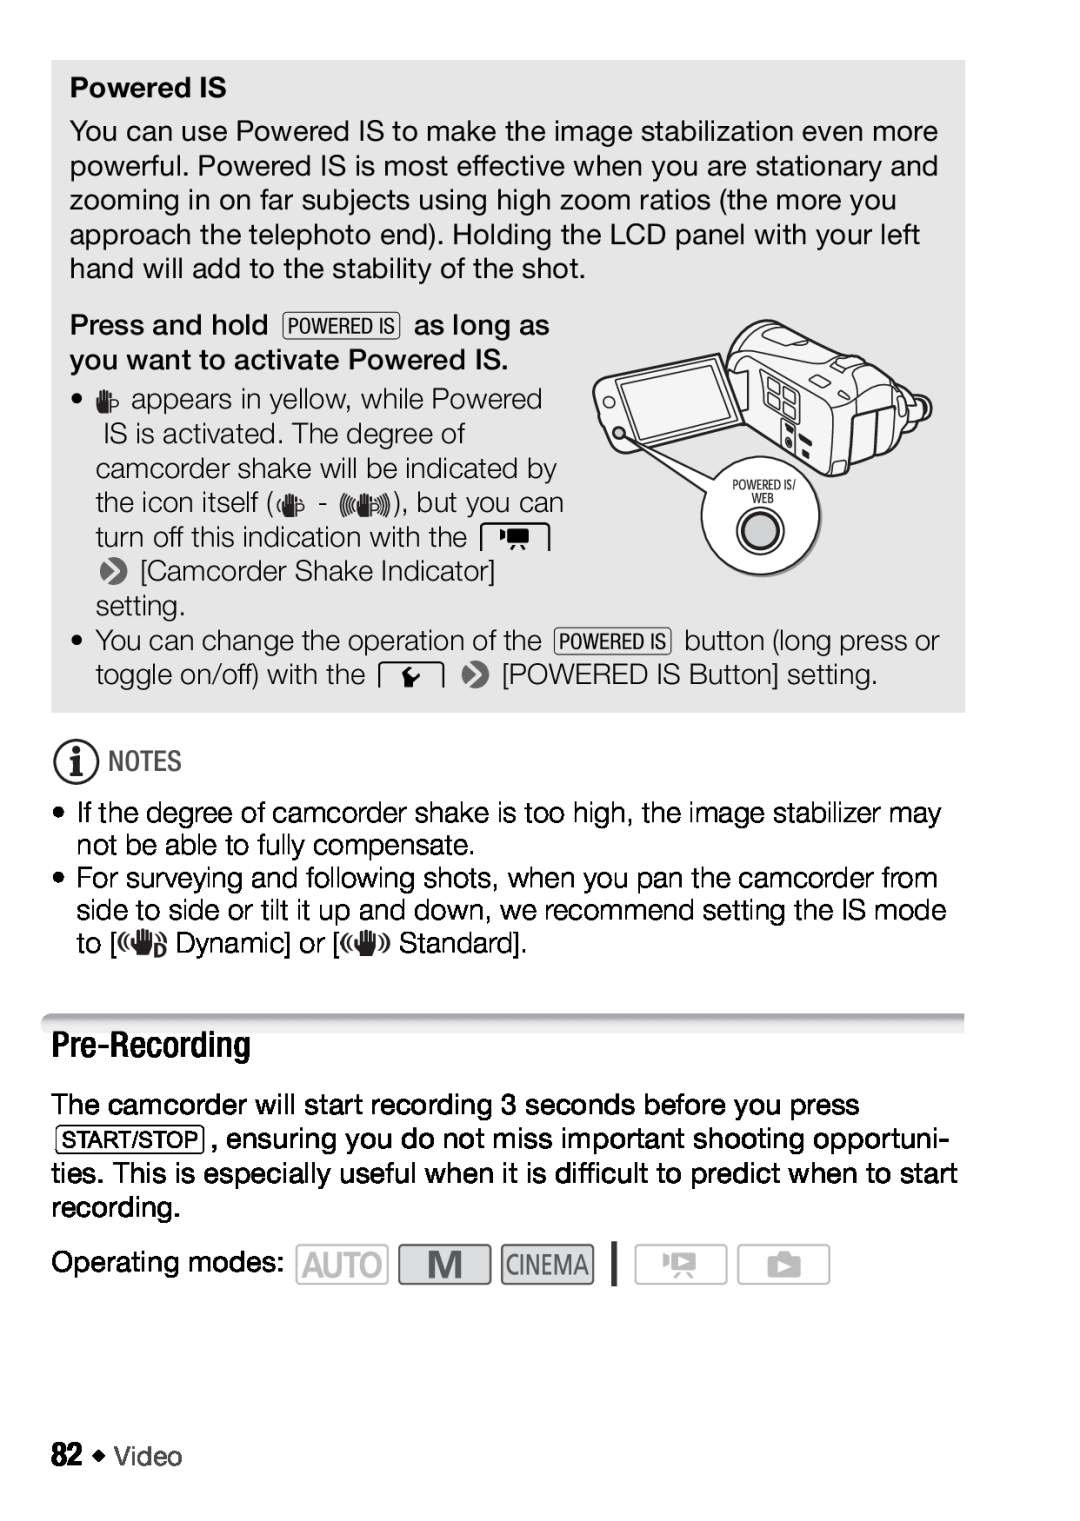 Canon HFM406, HFM46 instruction manual Pre-Recording, Powered IS 